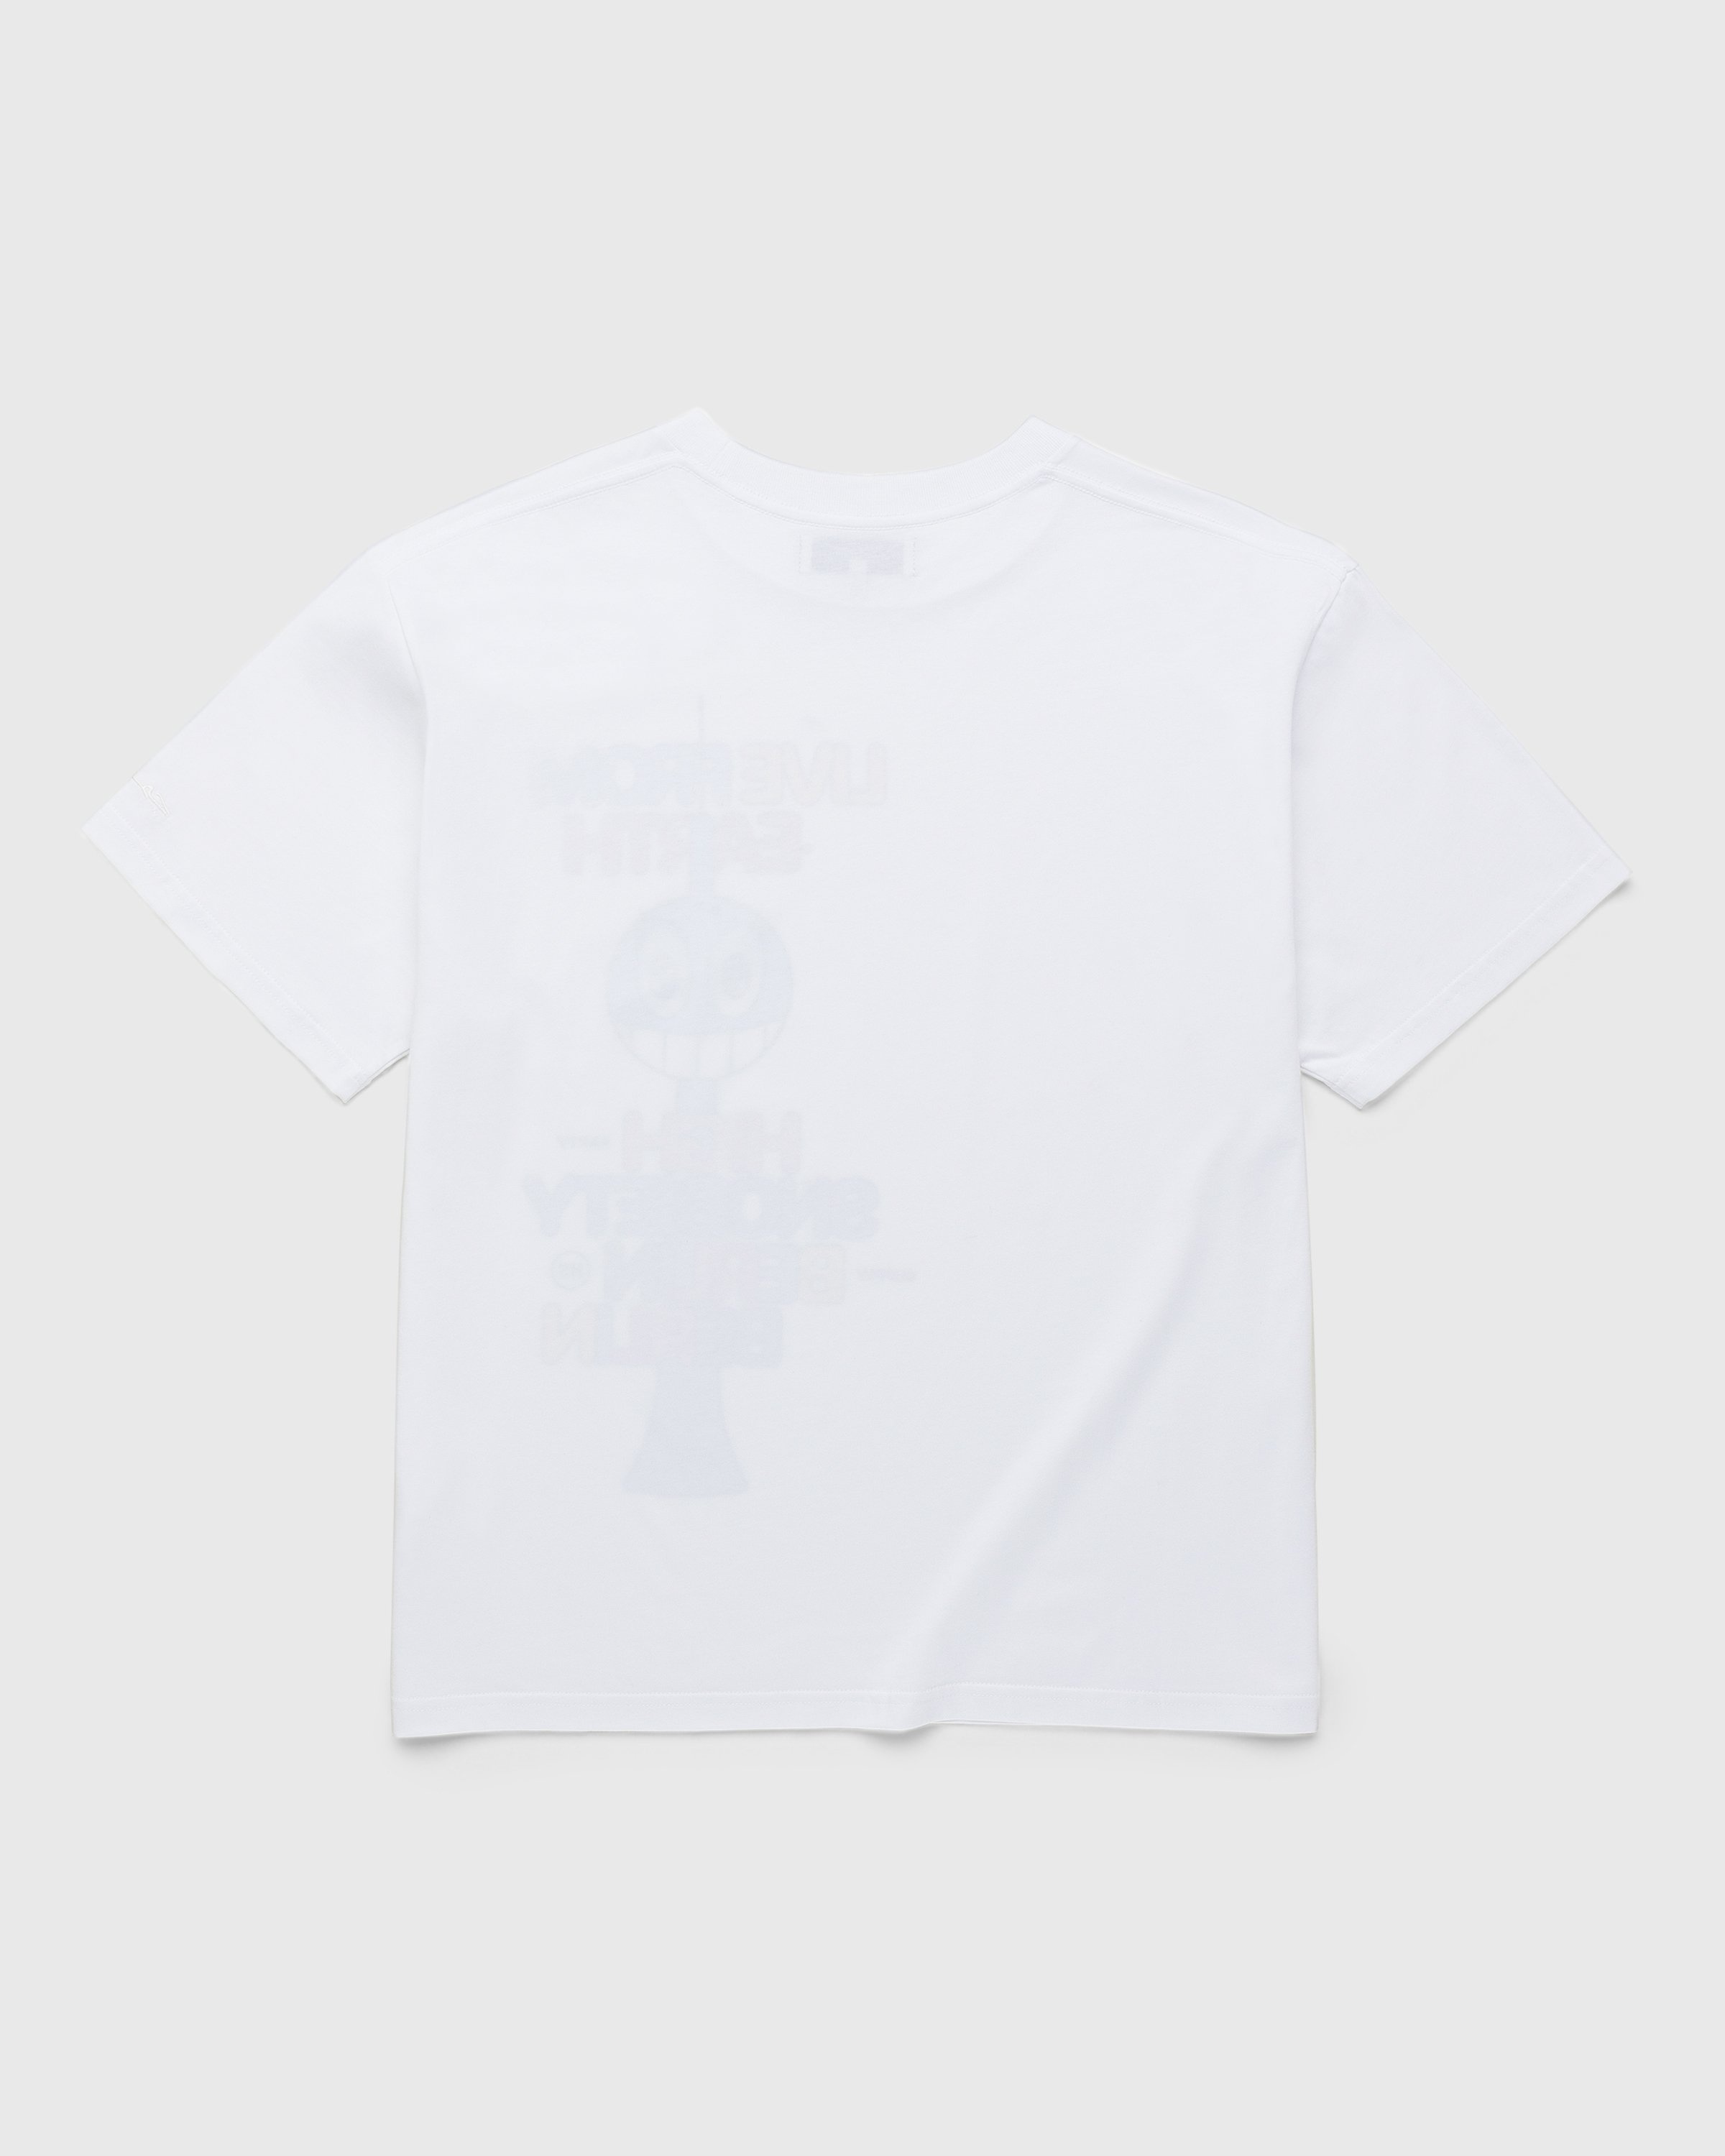 Live From Earth x Highsnobiety – BERLIN, BERLIN 3 T-Shirt White - T-shirts - White - Image 2